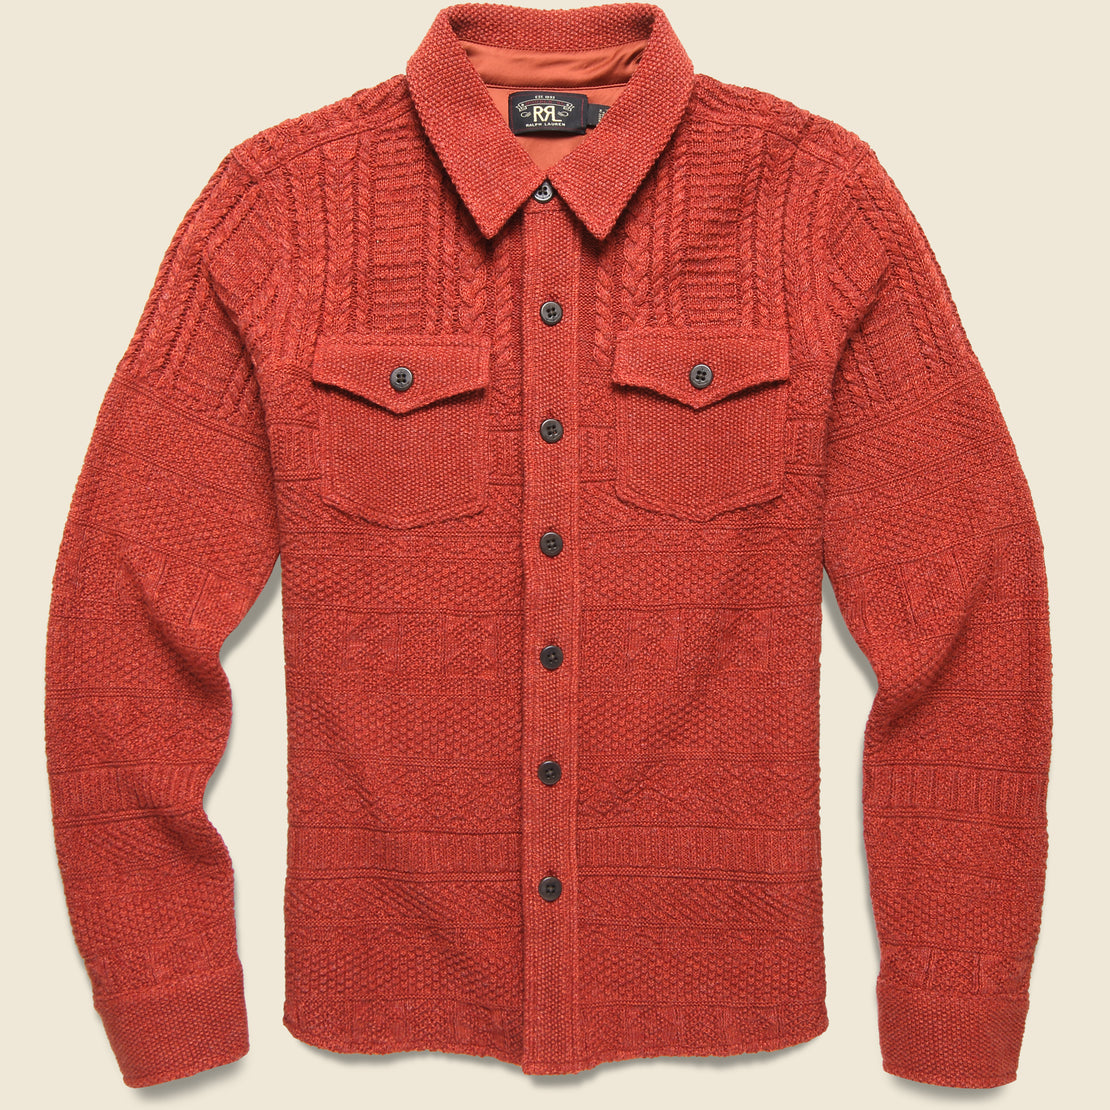 RRL CPO Guernsey Stitch Workshirt - Faded Red Heather